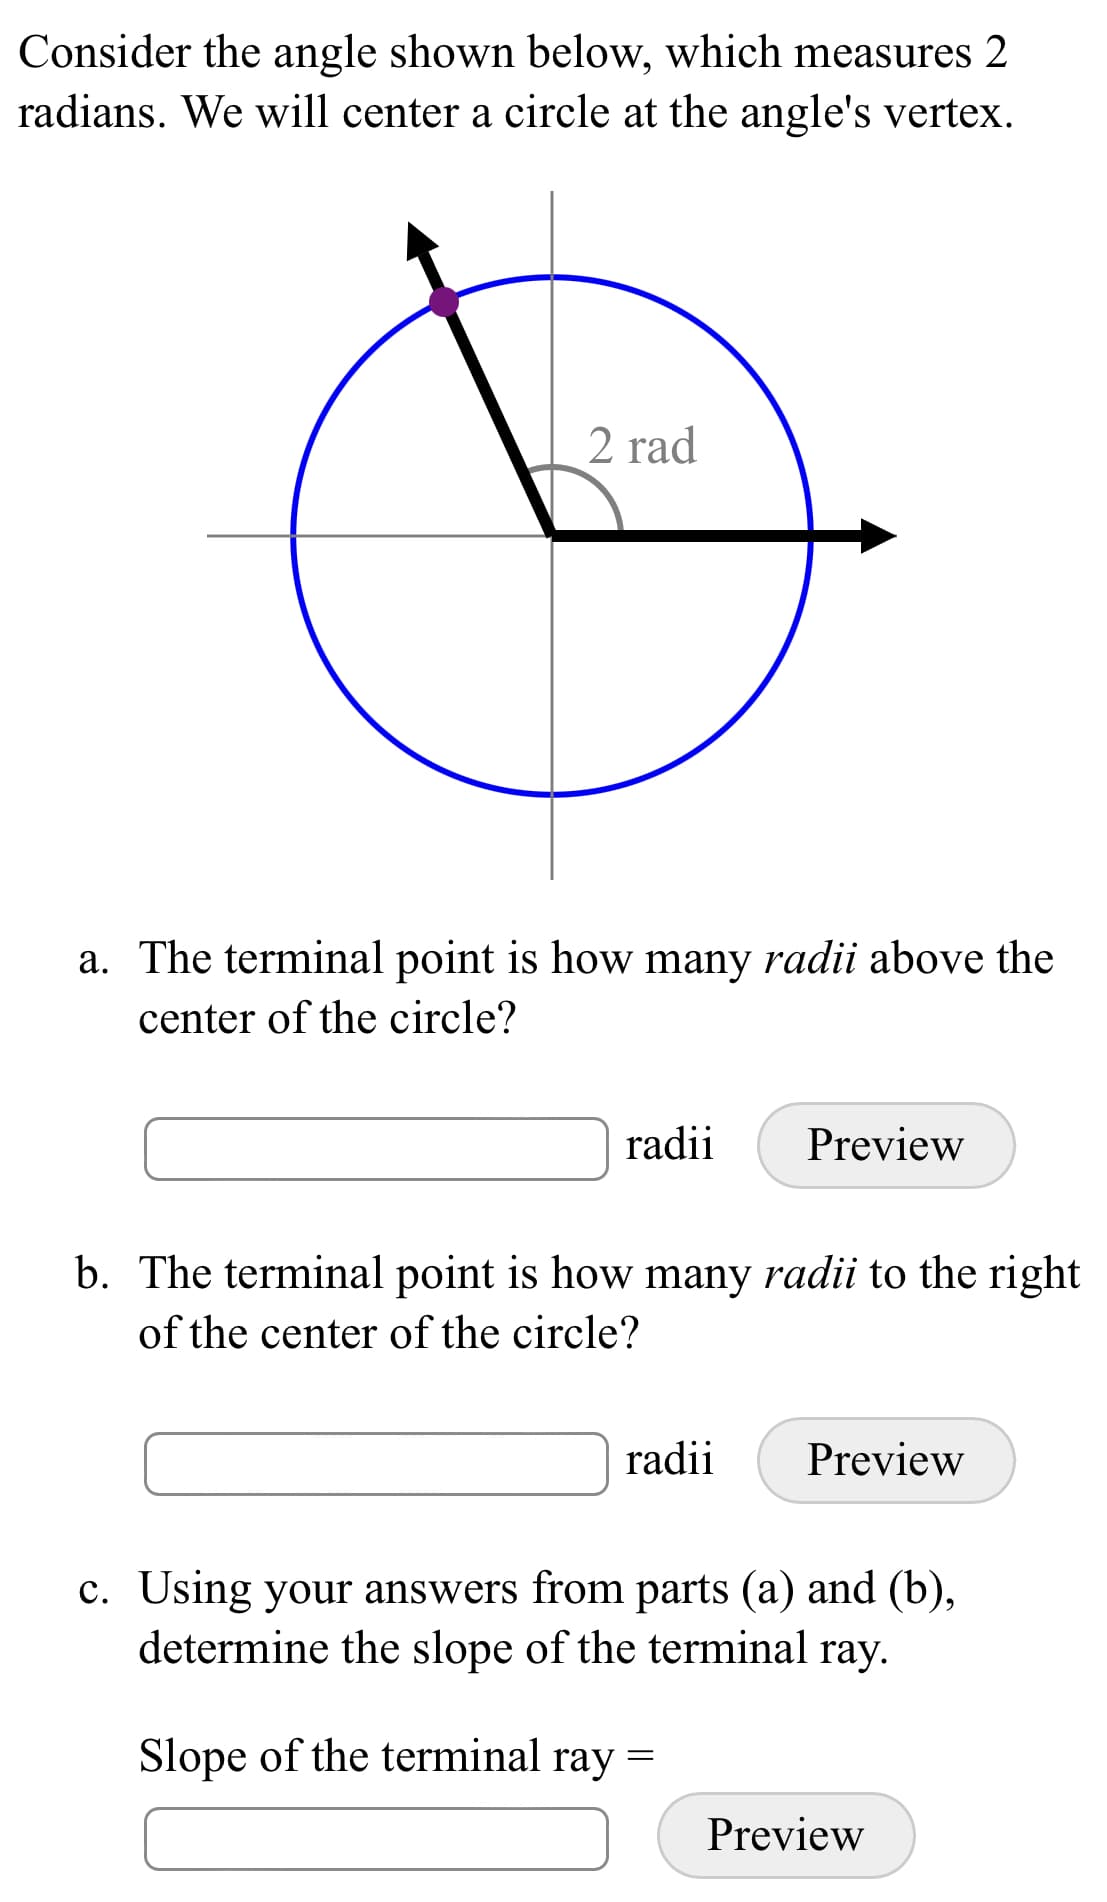 Consider the angle shown below, which measures 2
radians. We will center a circle at the angle's vertex.
2 rad
a. The terminal point is how many radii above the
center of the circle?
radii
Preview
b. The terminal point is how many radii to the right
of the center of the circle?
radii
Preview
c. Using your answers from parts (a) and (b),
determine the slope of the terminal ray.
Slope of the terminal ray =
Preview
